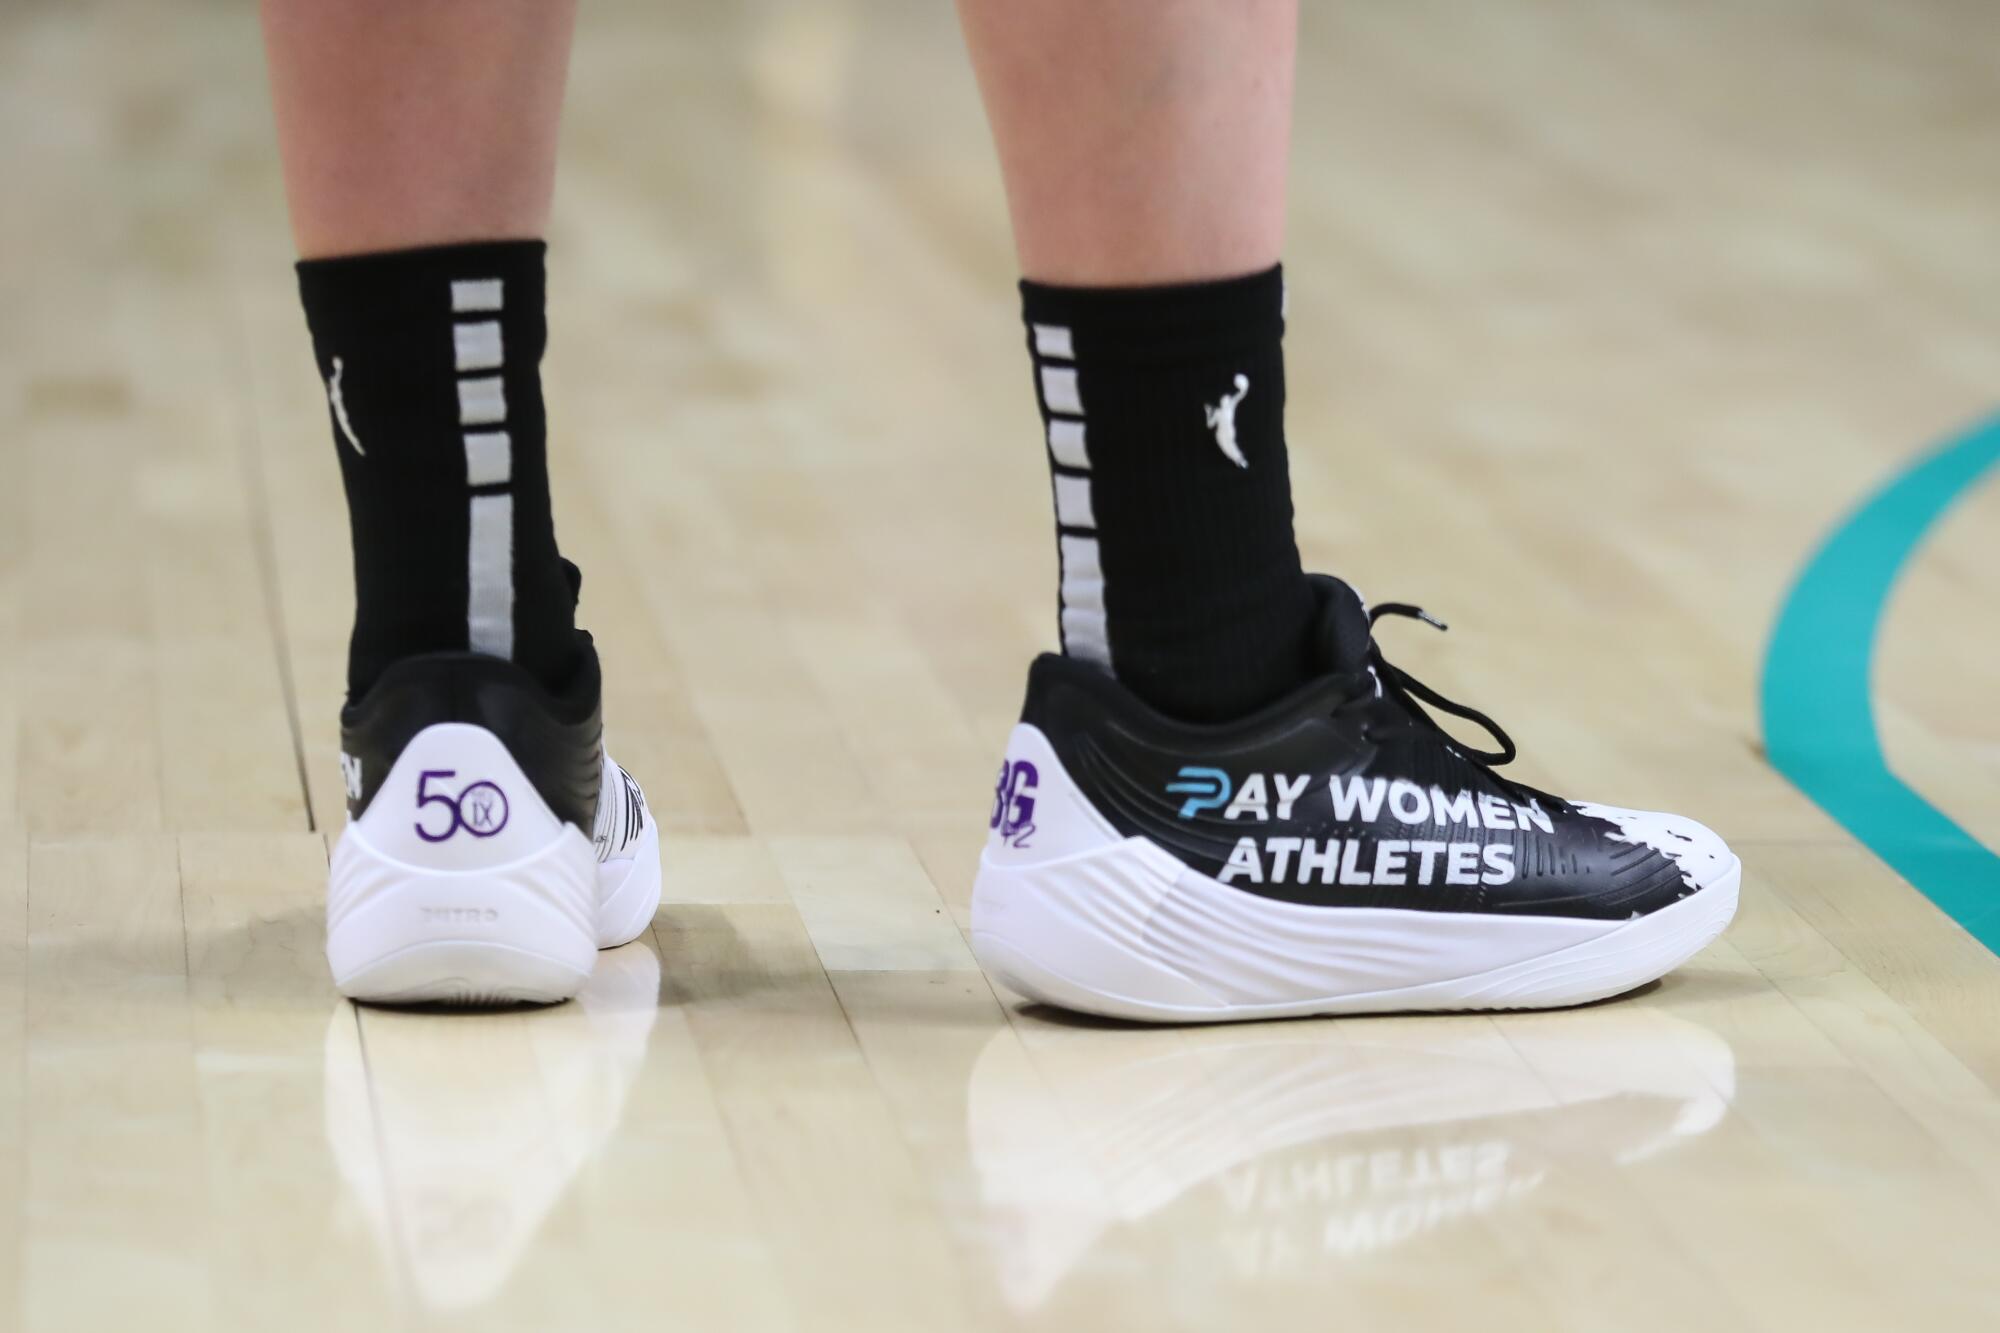 A look at the basketball shoes of Sparks forward Katie Lou Samuelson with "Pay Women Athletes" in writing.